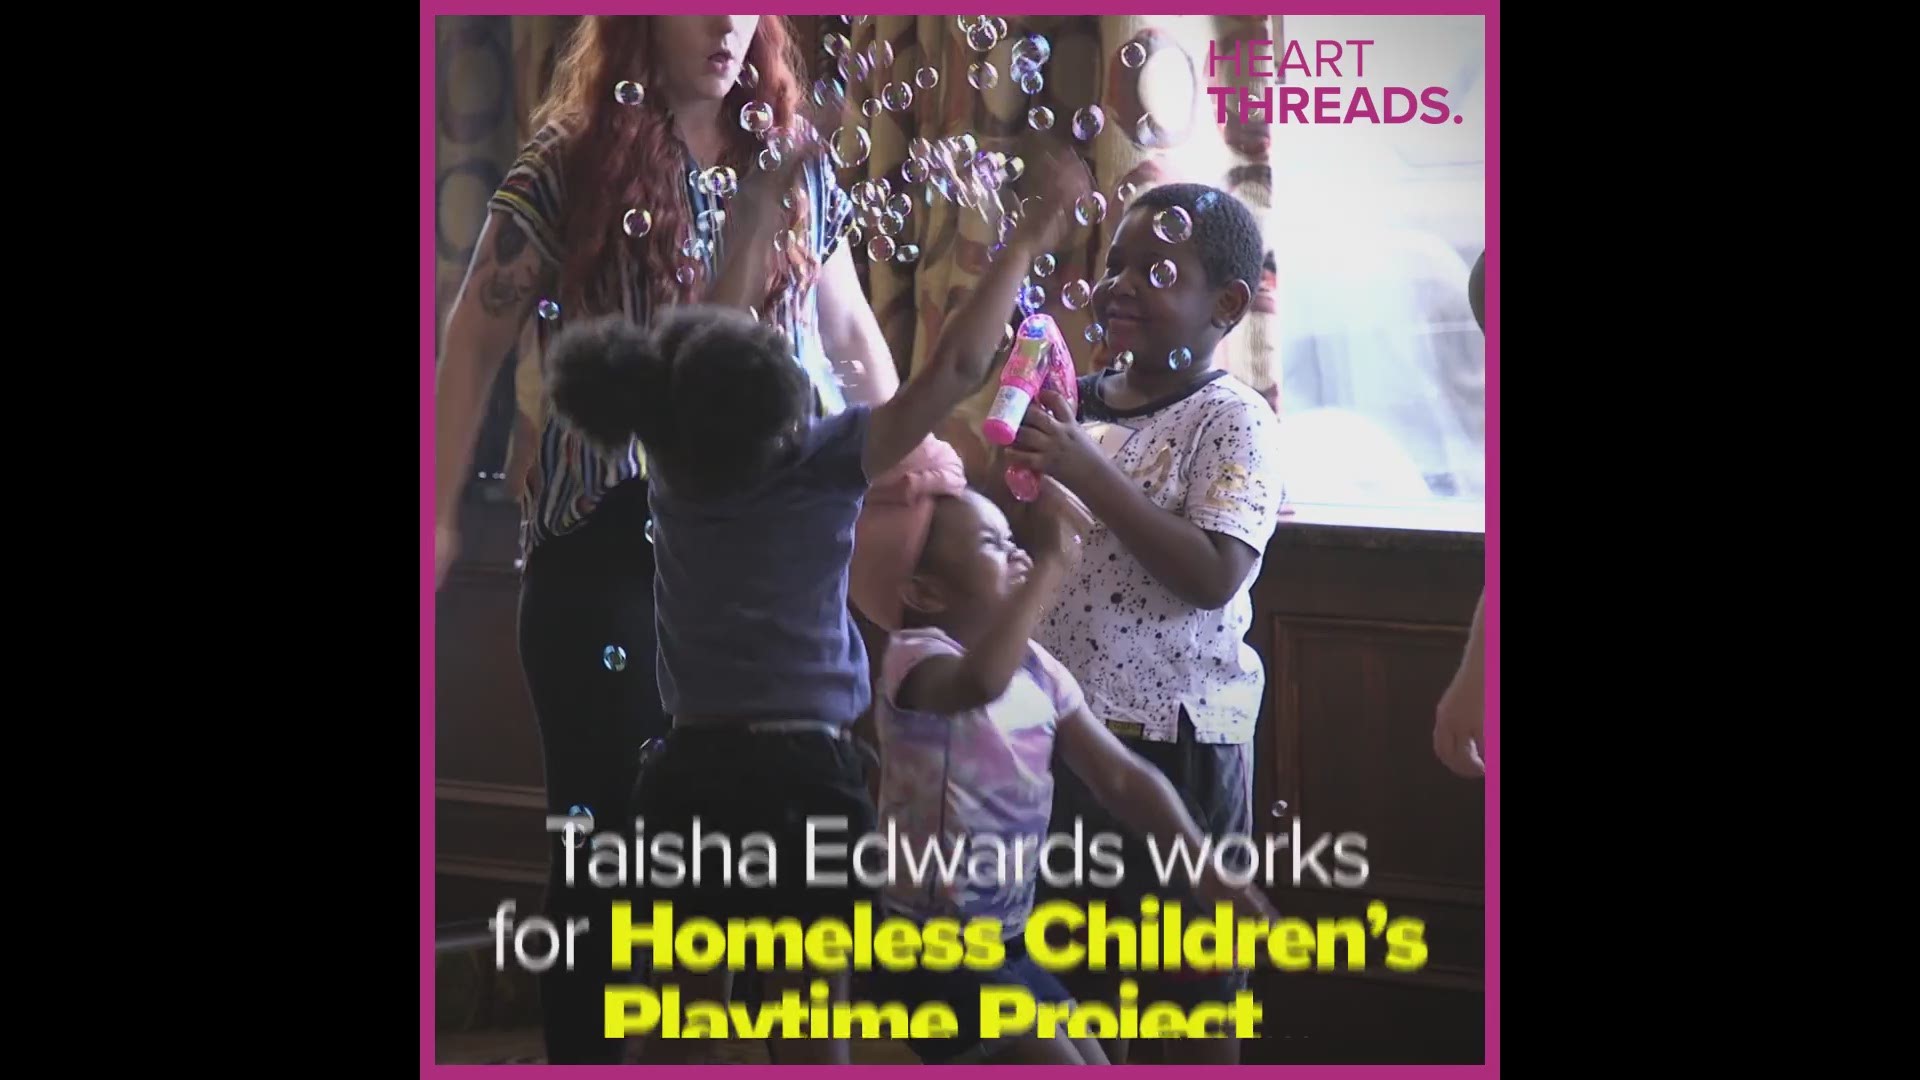 Taisha Edwards learned about the impacts of homelessness on children and was inspired to help. Now she makes sure children experiencing homelessness have a safe place to play.